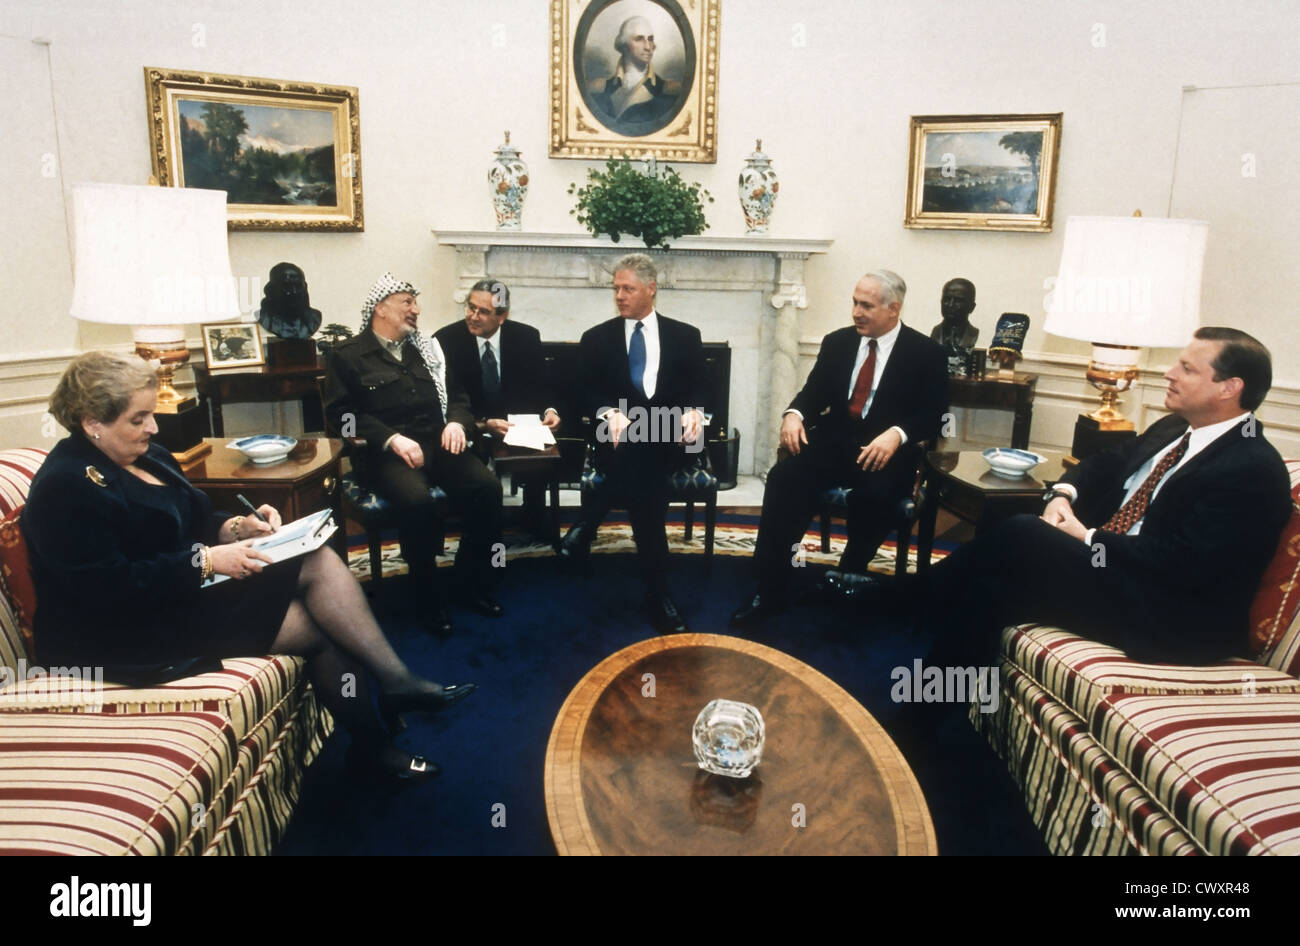 US President Bill Clinton and Vice President Al Gore meet with Middle East leaders in the Oval Office of the White House October 15, 1998 in Washington, DC. From left are, Vice President Gore, Israeli Prime Minister Benjamin Netanyahu, the president, an unidentified interpreter, Palestinian leader Yasser Arafat, and Secretary of State Madeleine Albright. Stock Photo